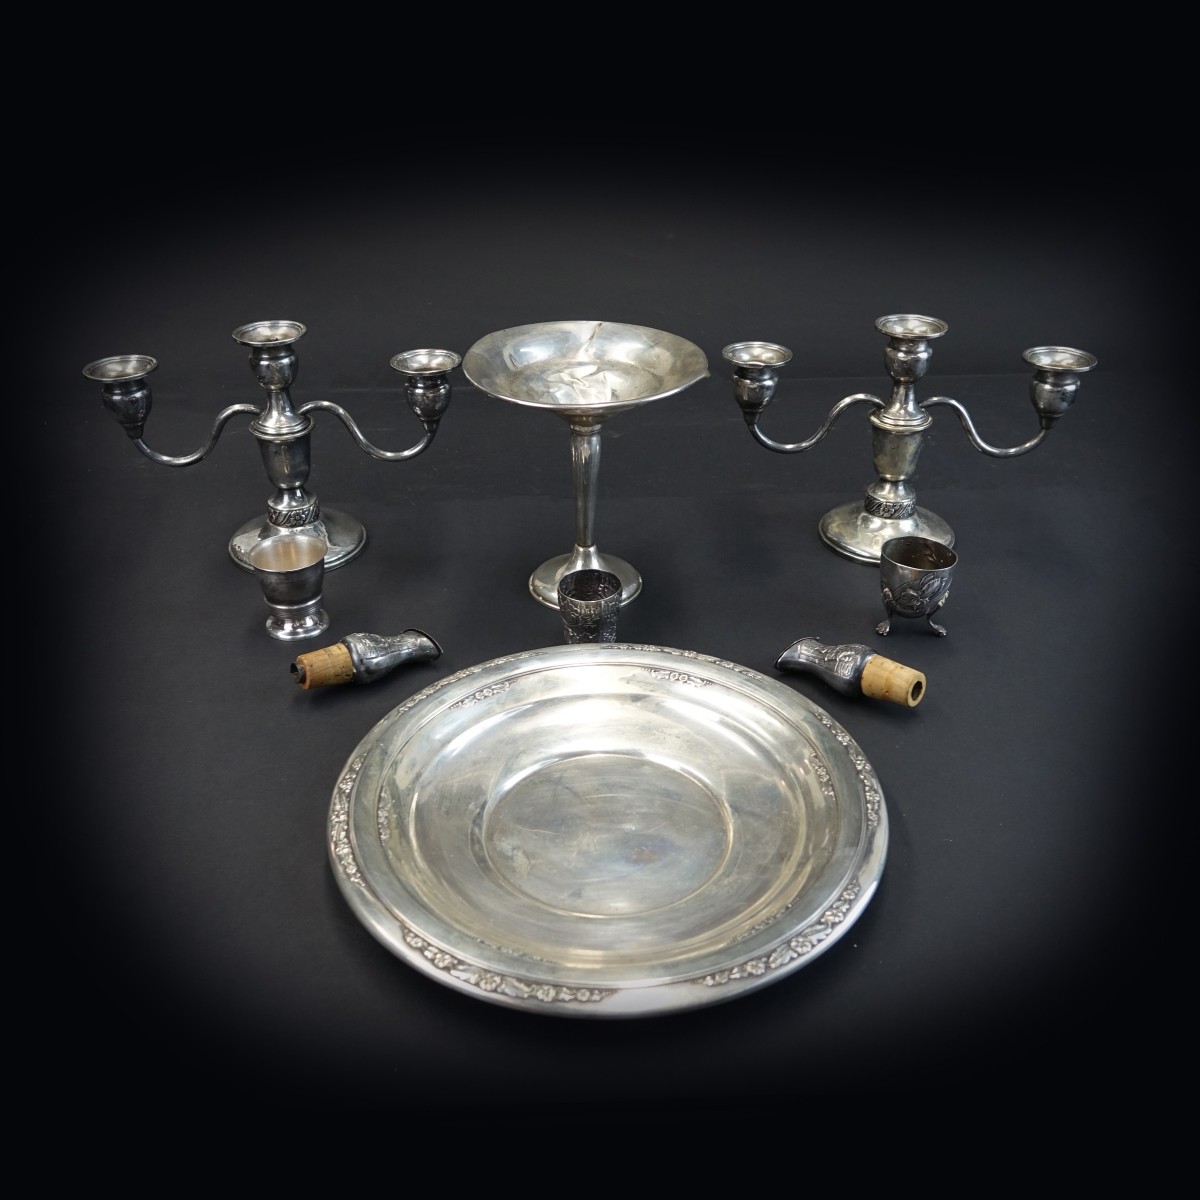 9 pcs Sterling & Silver Plate